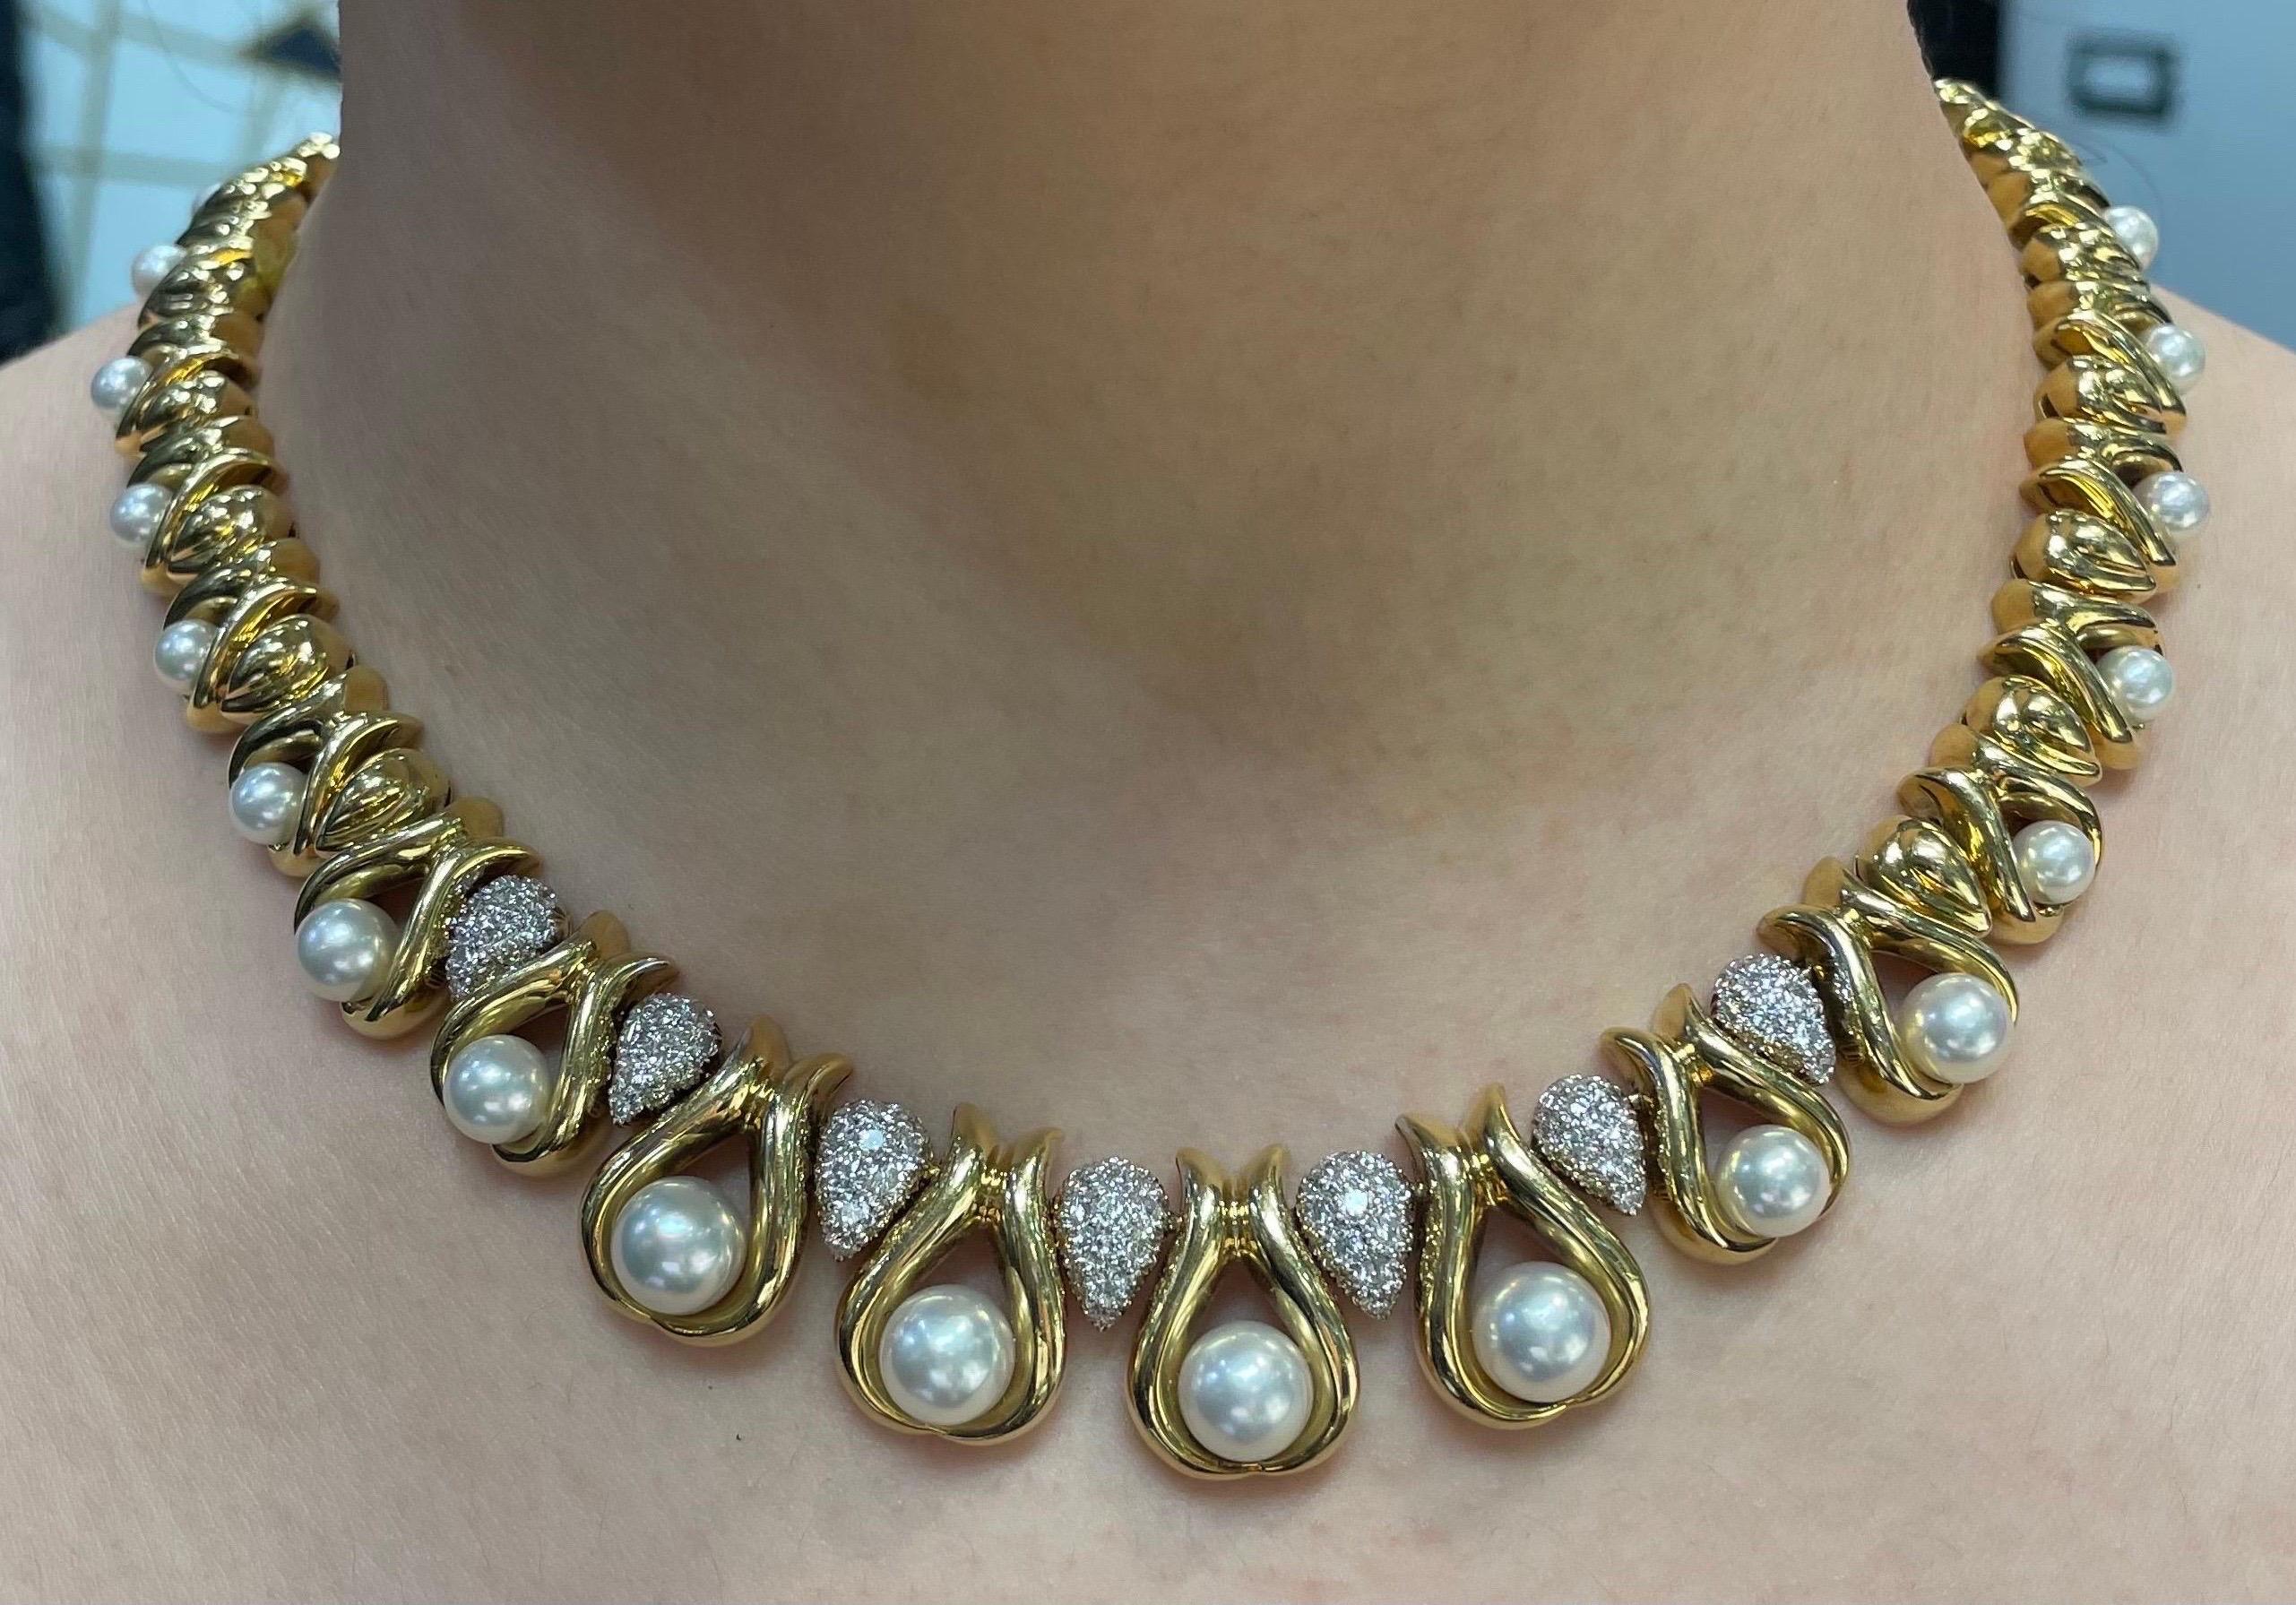 Pearl and Diamond Choker

A choker set with 26 cultured pearls and accented with round-cut diamonds. 

Approximate Diamond Weight: 5.00 Carats
Approximately Measures: 15